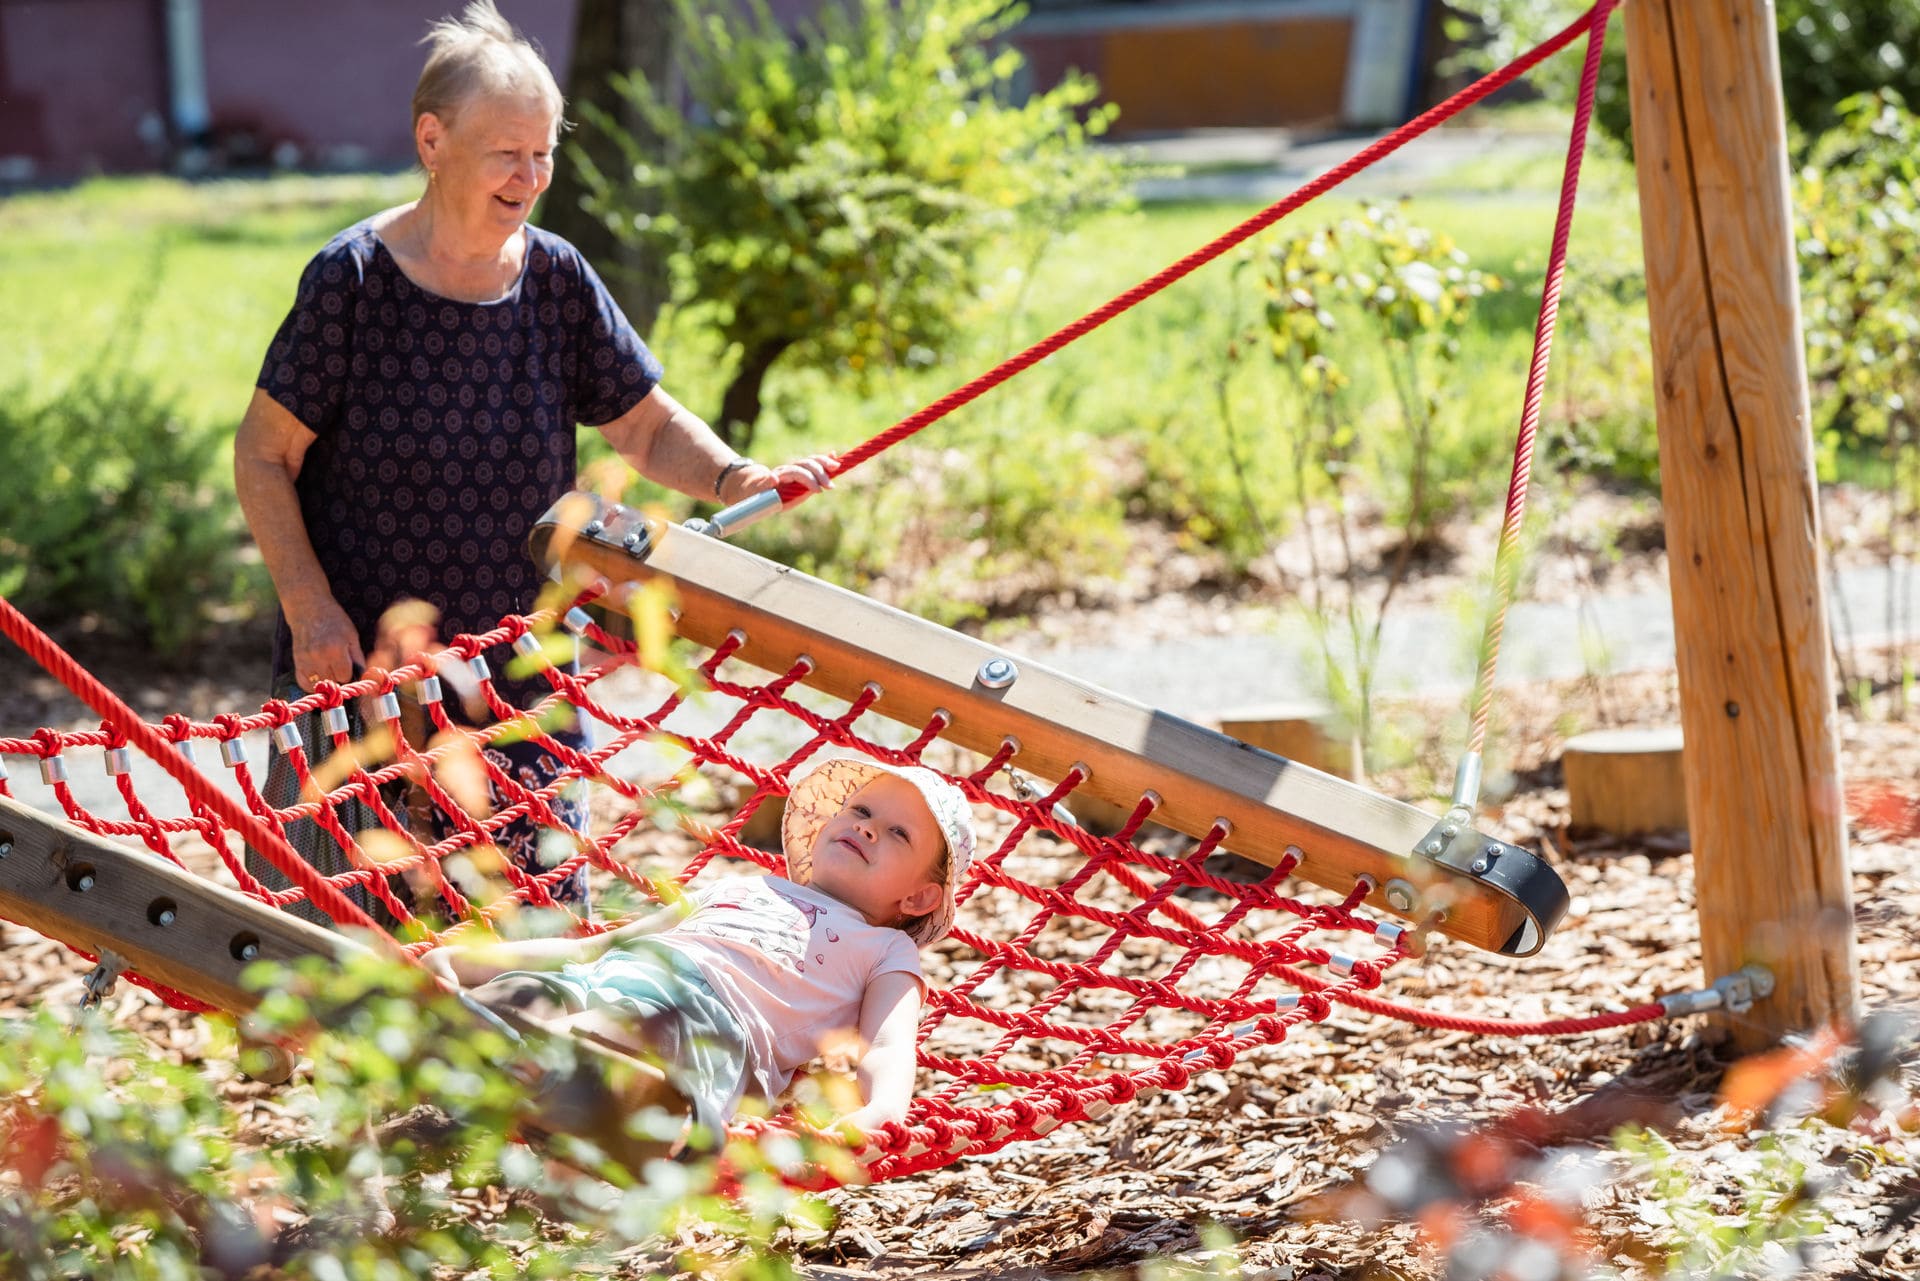 Hammock for children and adults to swing and sit on